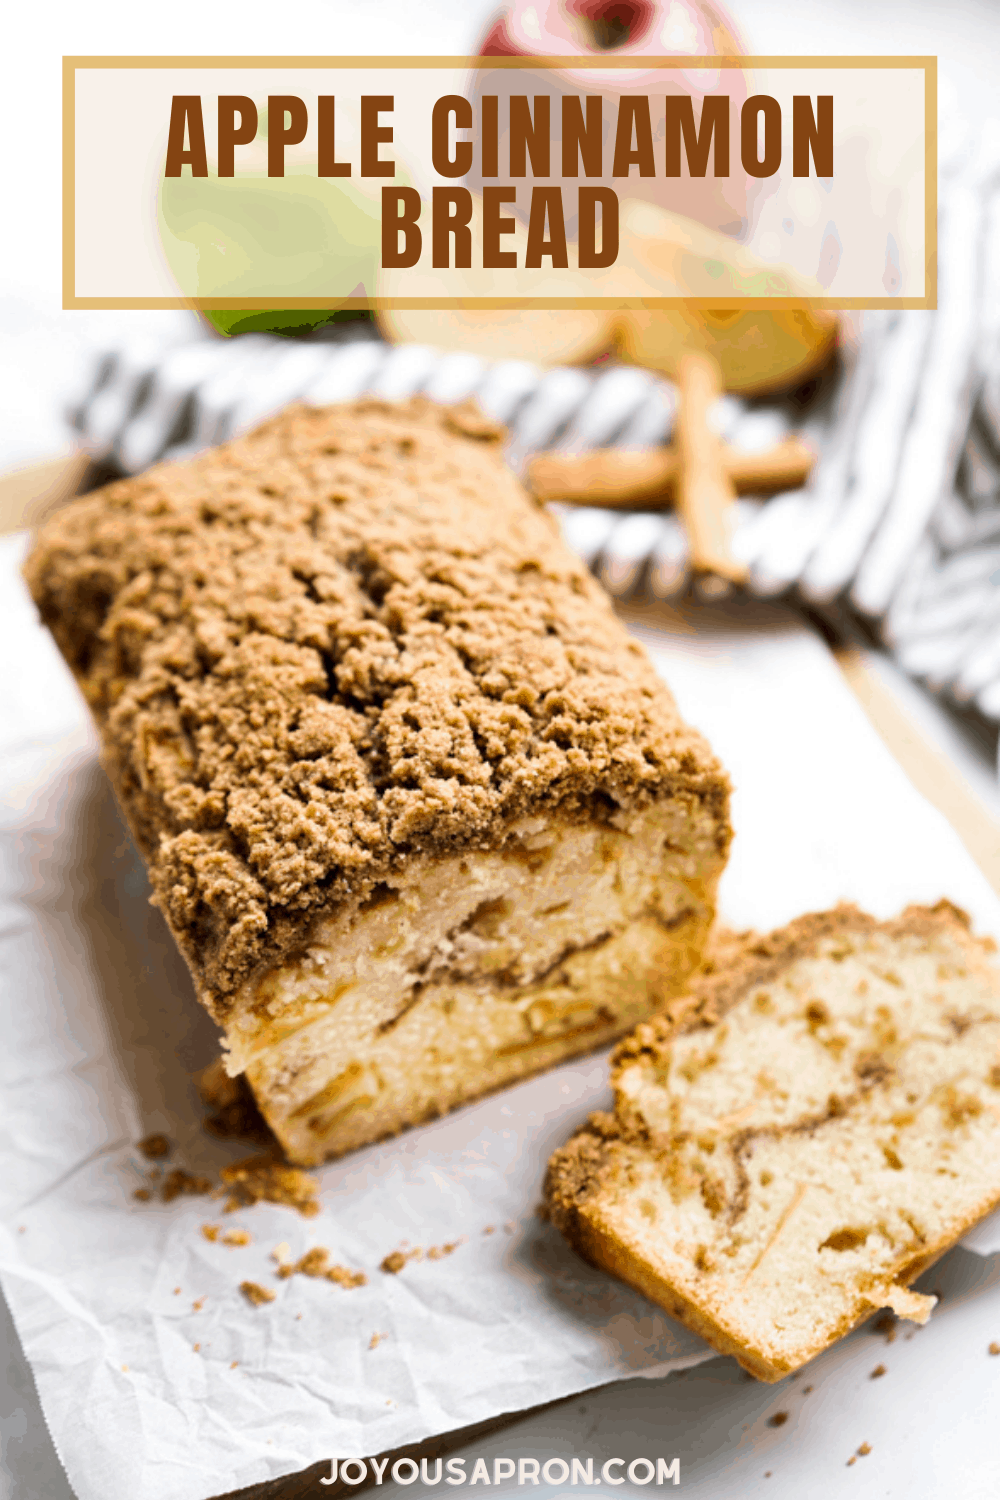 Apple Cinnamon Bread - An easy Fall breakfast, snack or even dessert! Moist and and delicious cake-like vanilla infused bread filled with apples and cinnamon swirl, and topped with cinnamon brown sugar crumble. via @joyousapron